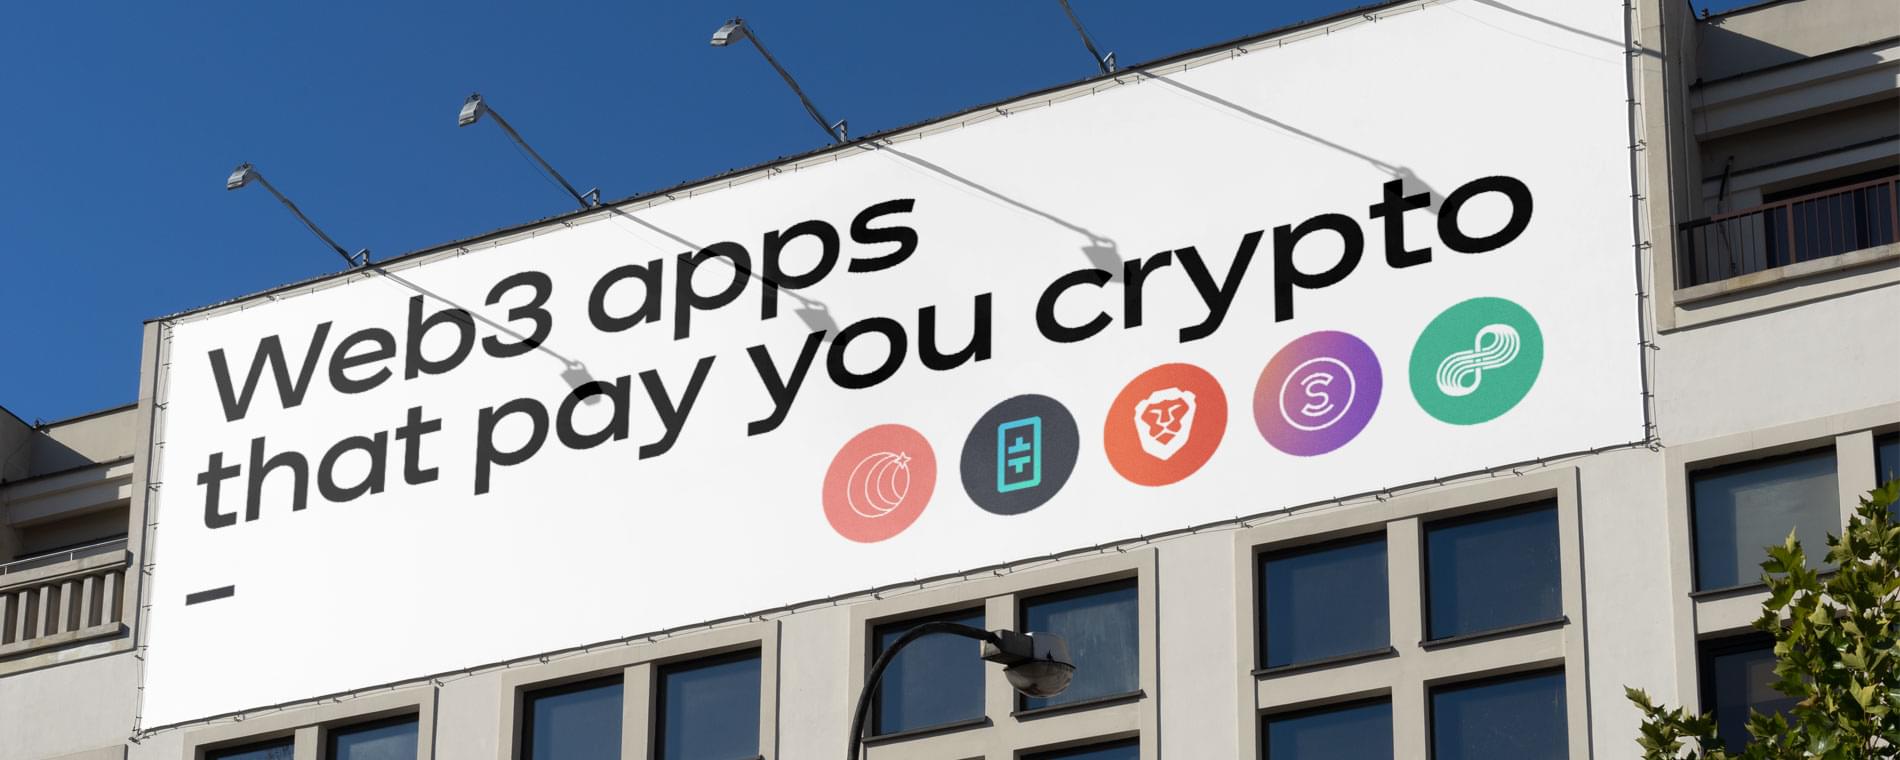 5 Web3 apps that pay you crypto